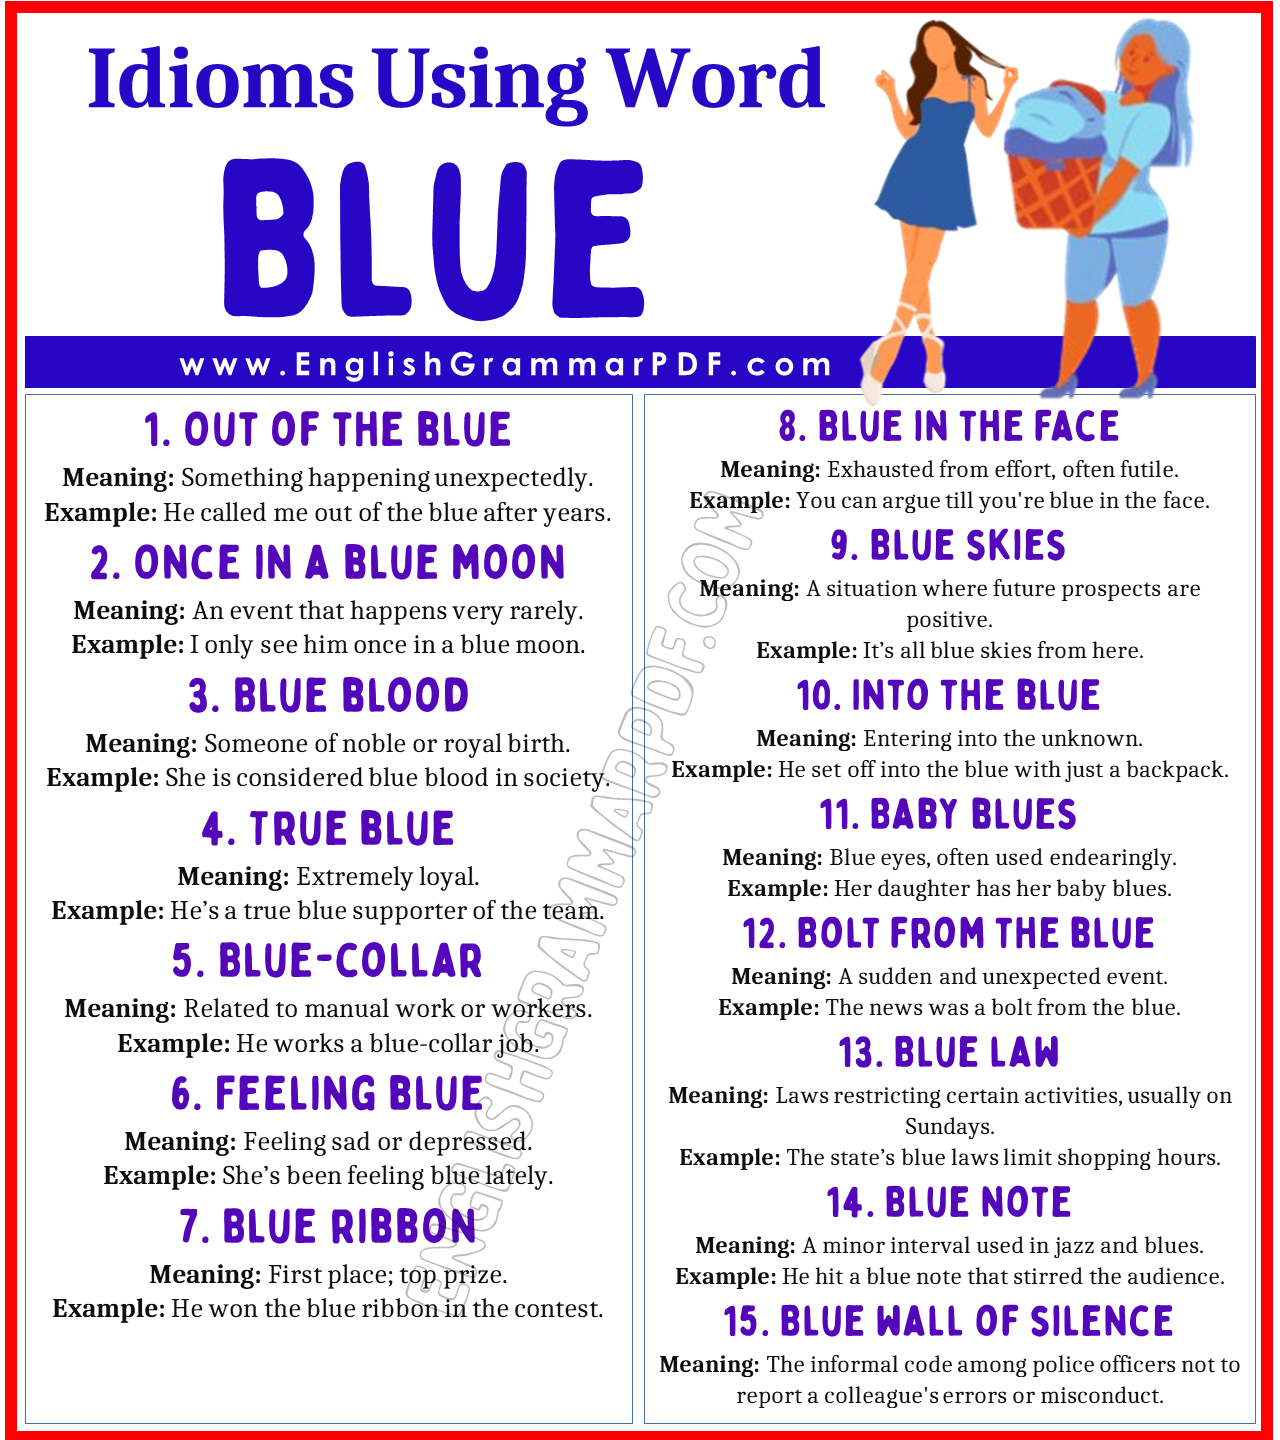 Idioms Using the Word Blue